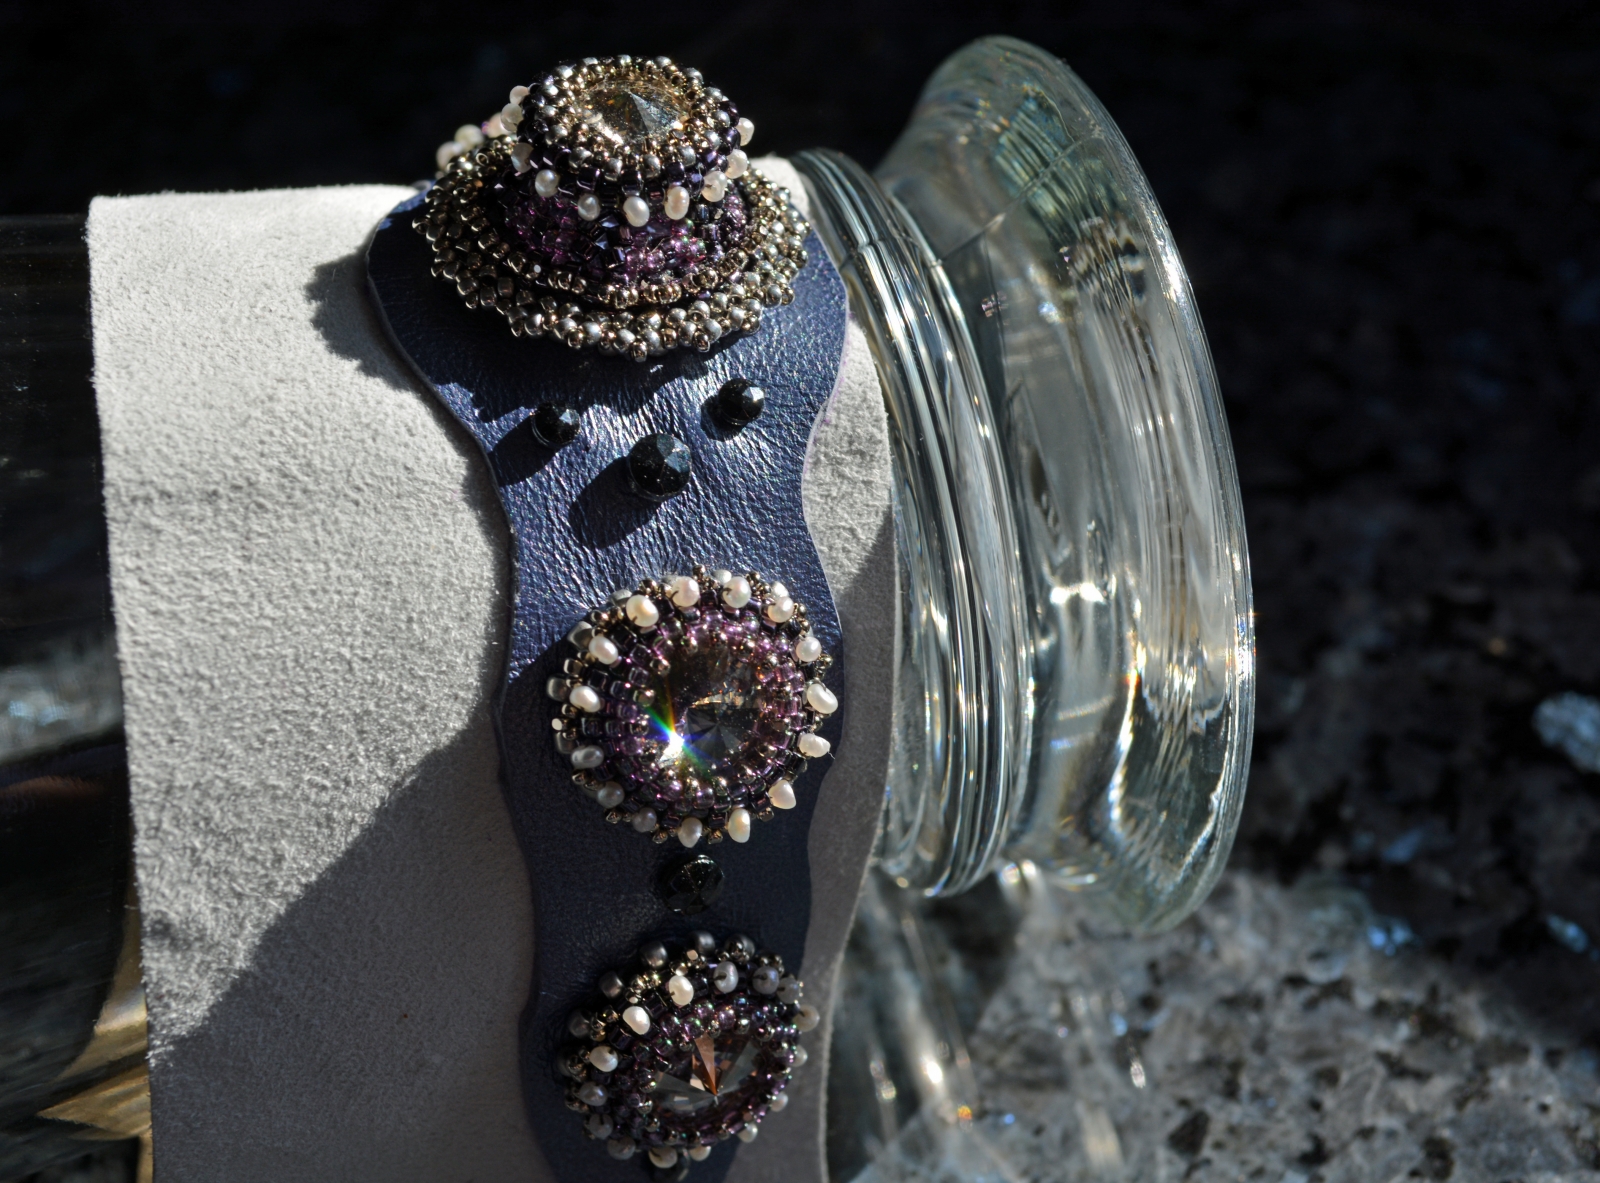 Design by Laura McCabe; Stitched and beaded by Janet Bocciardi